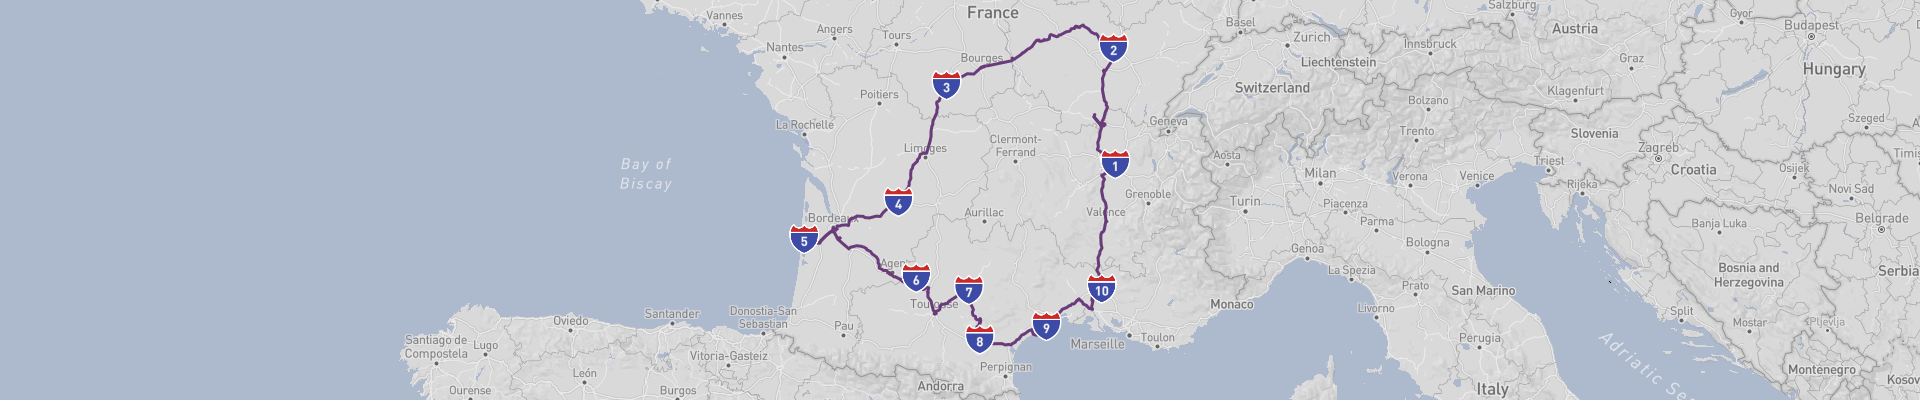 South West France Road Trip